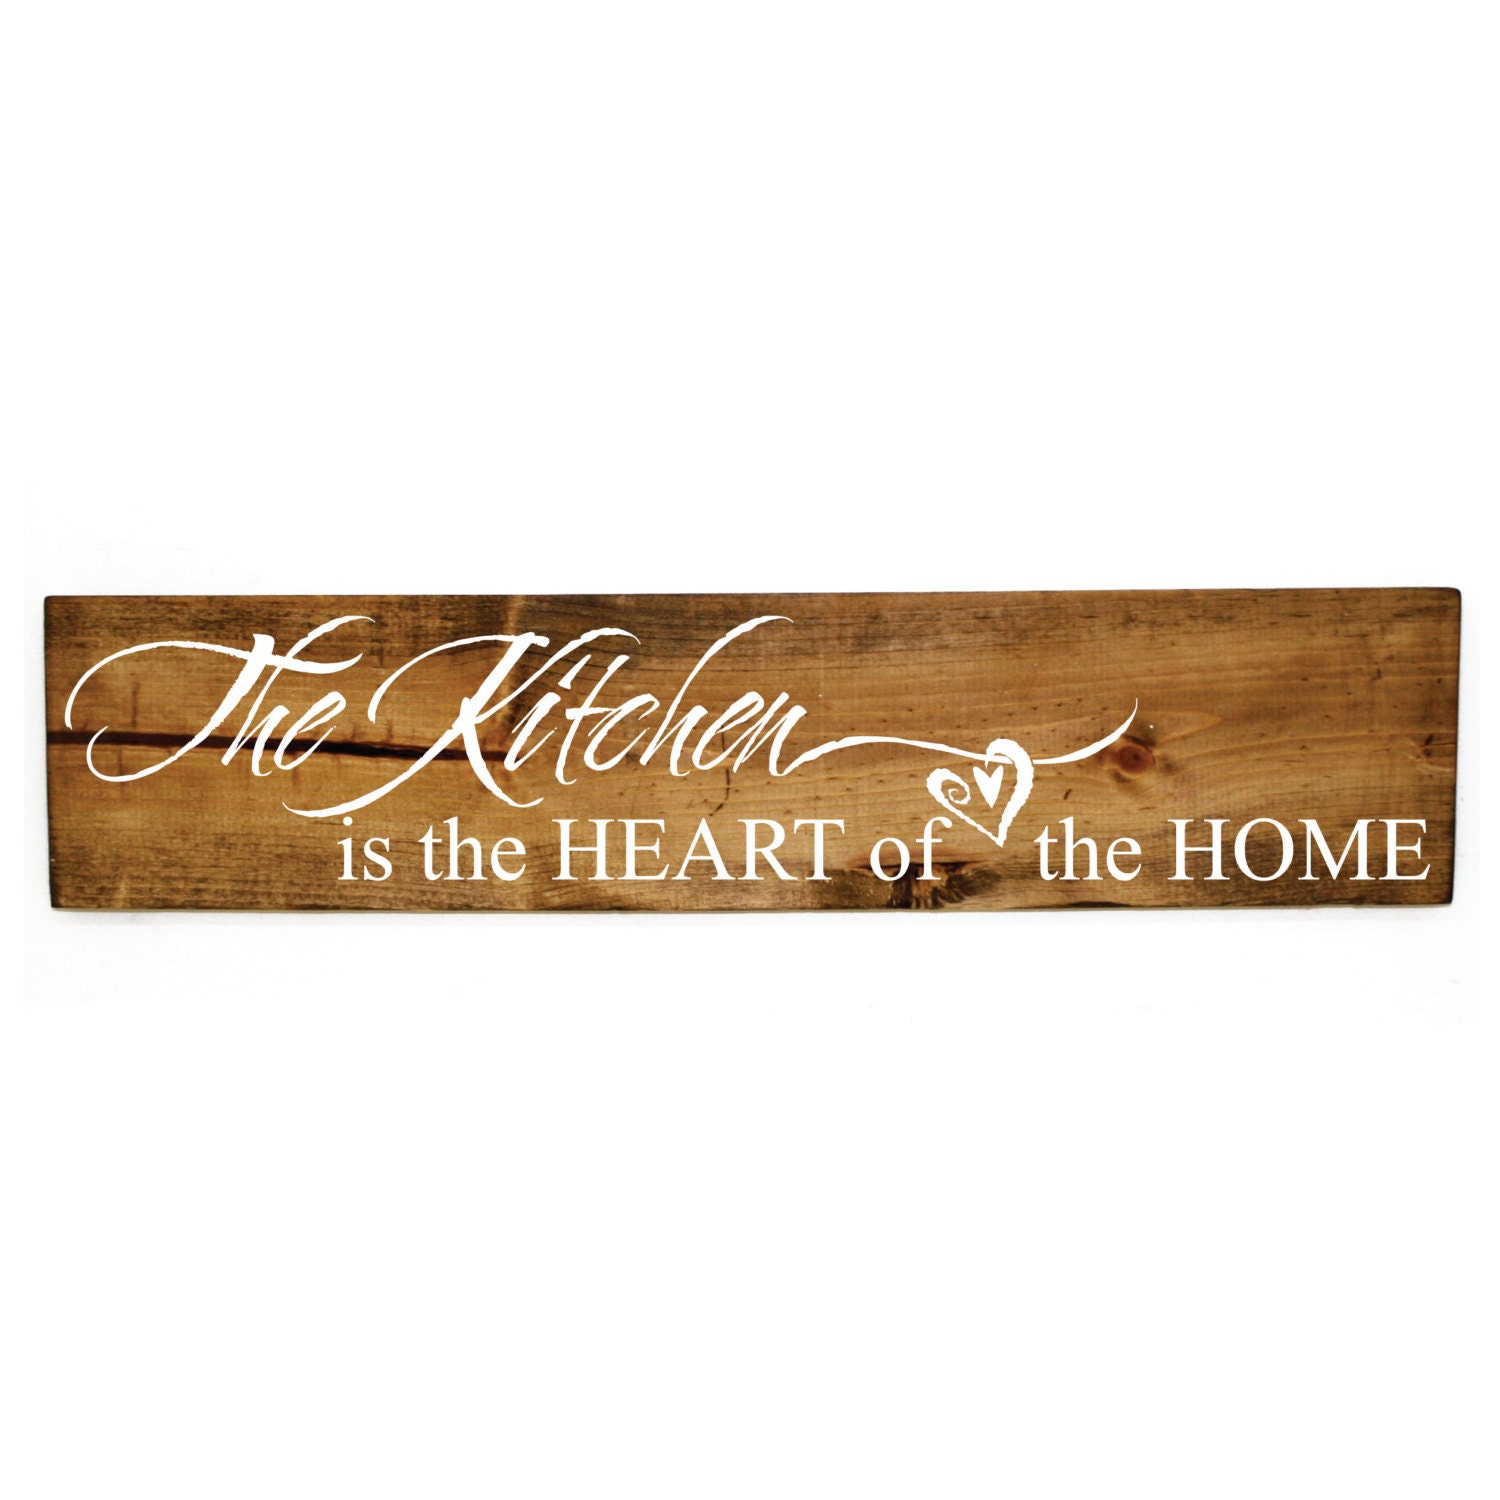 Download The kitchen is the heart of the home wood sign Gift by LEVinyl